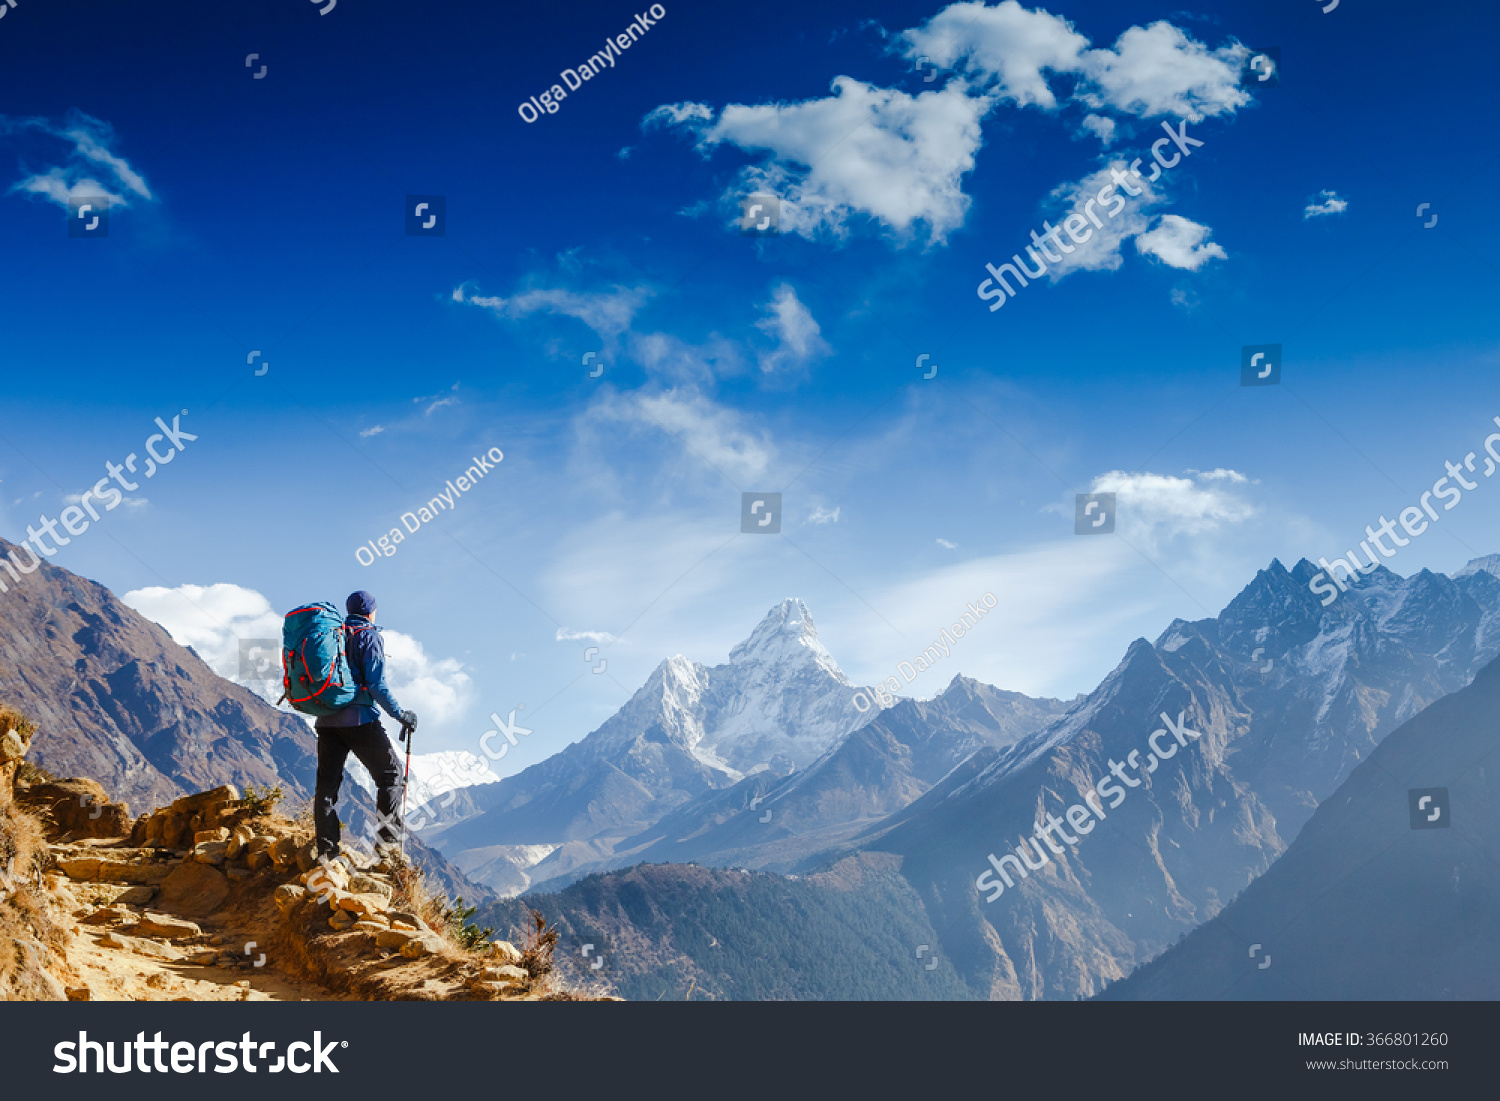 Happy hiker winning reaching life goal, success, freedom and happiness, achievement in mountains. Himalayas. Nepal #366801260